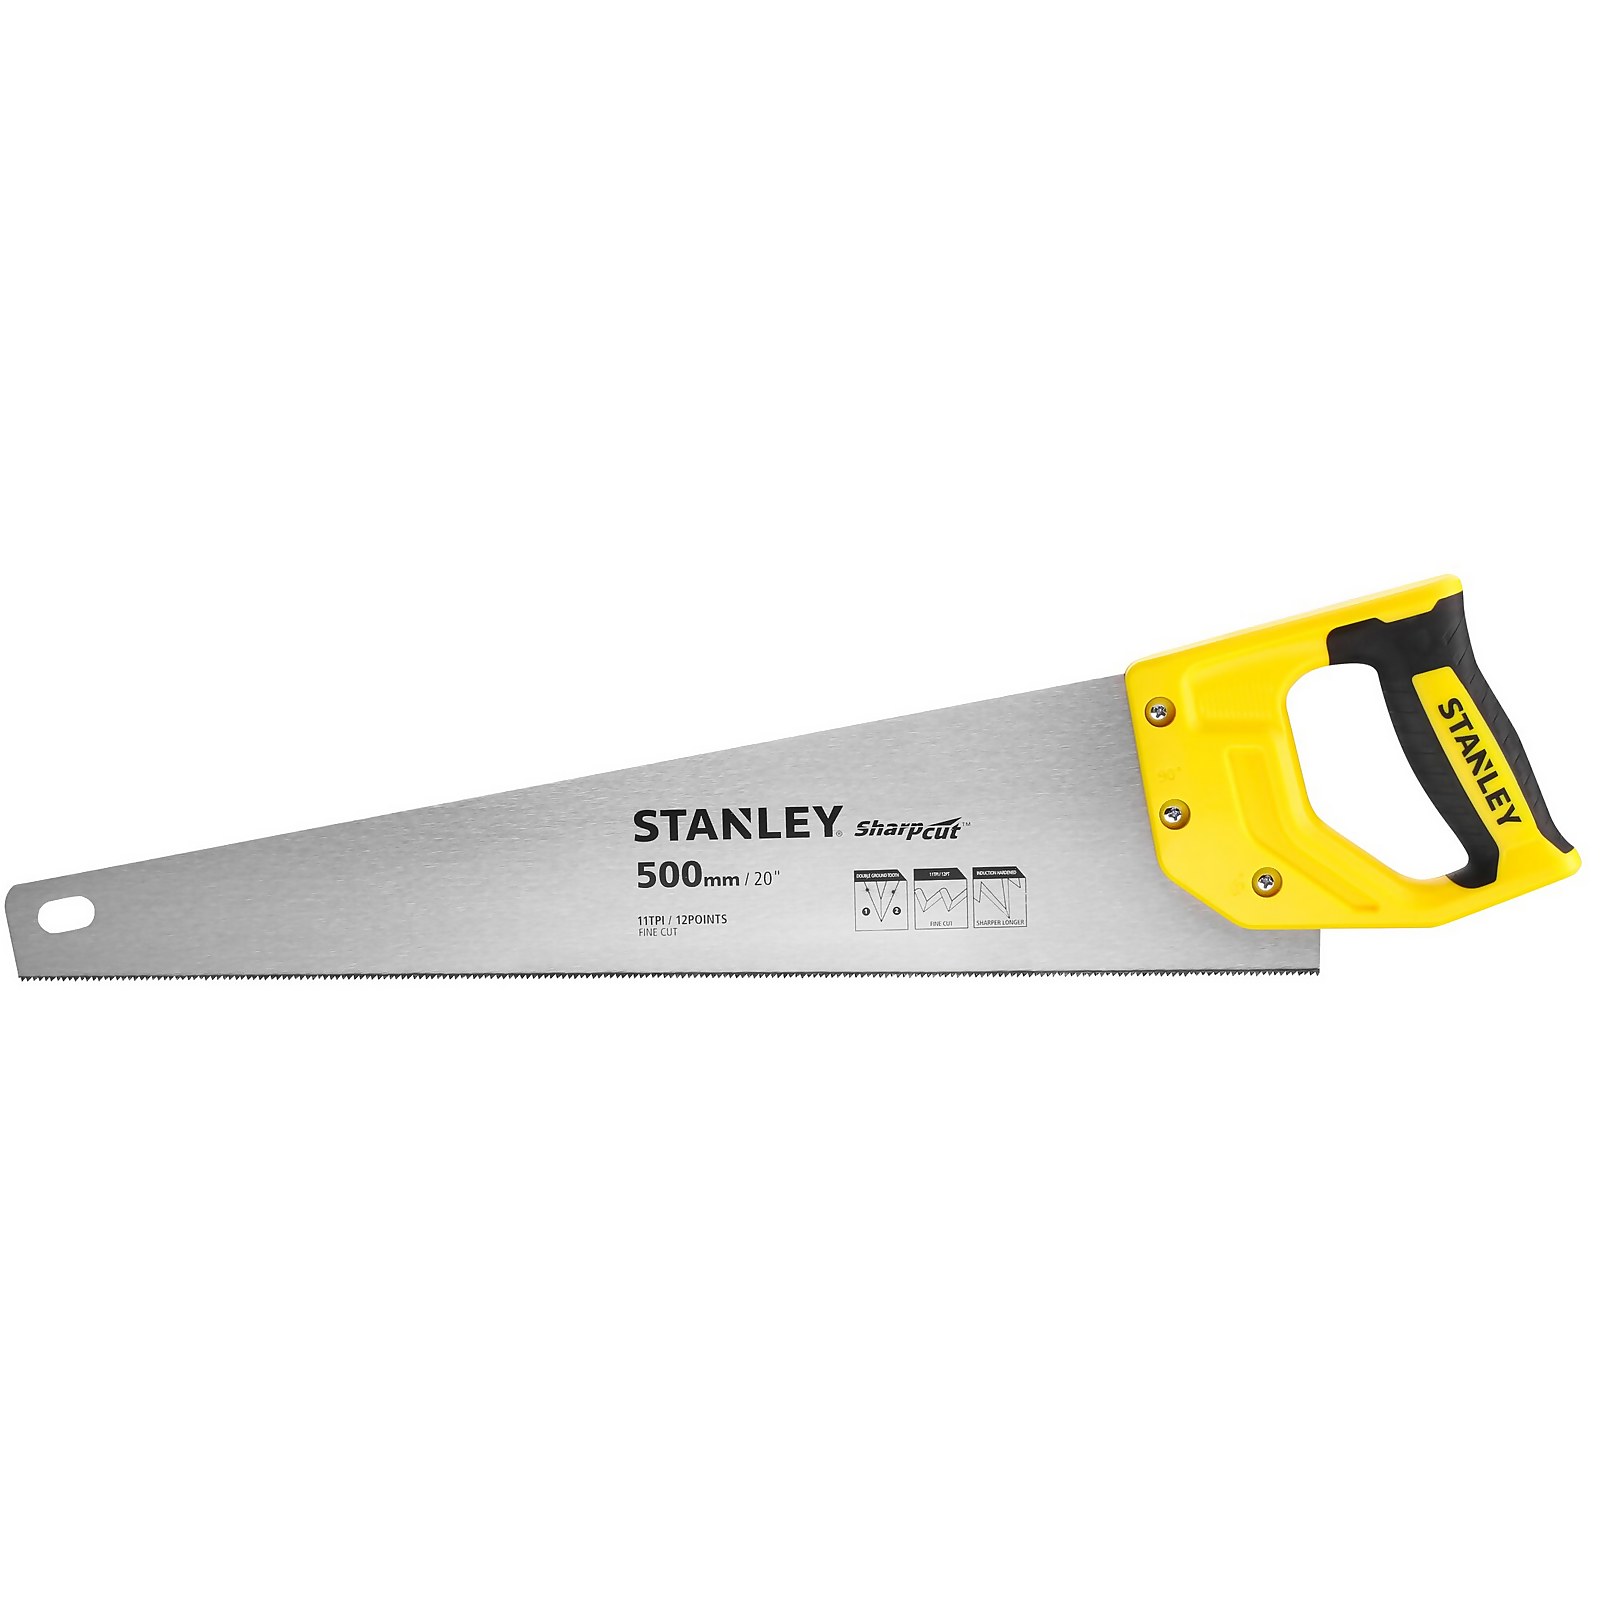 Photo of Stanley Fine Cut Saw - 20in